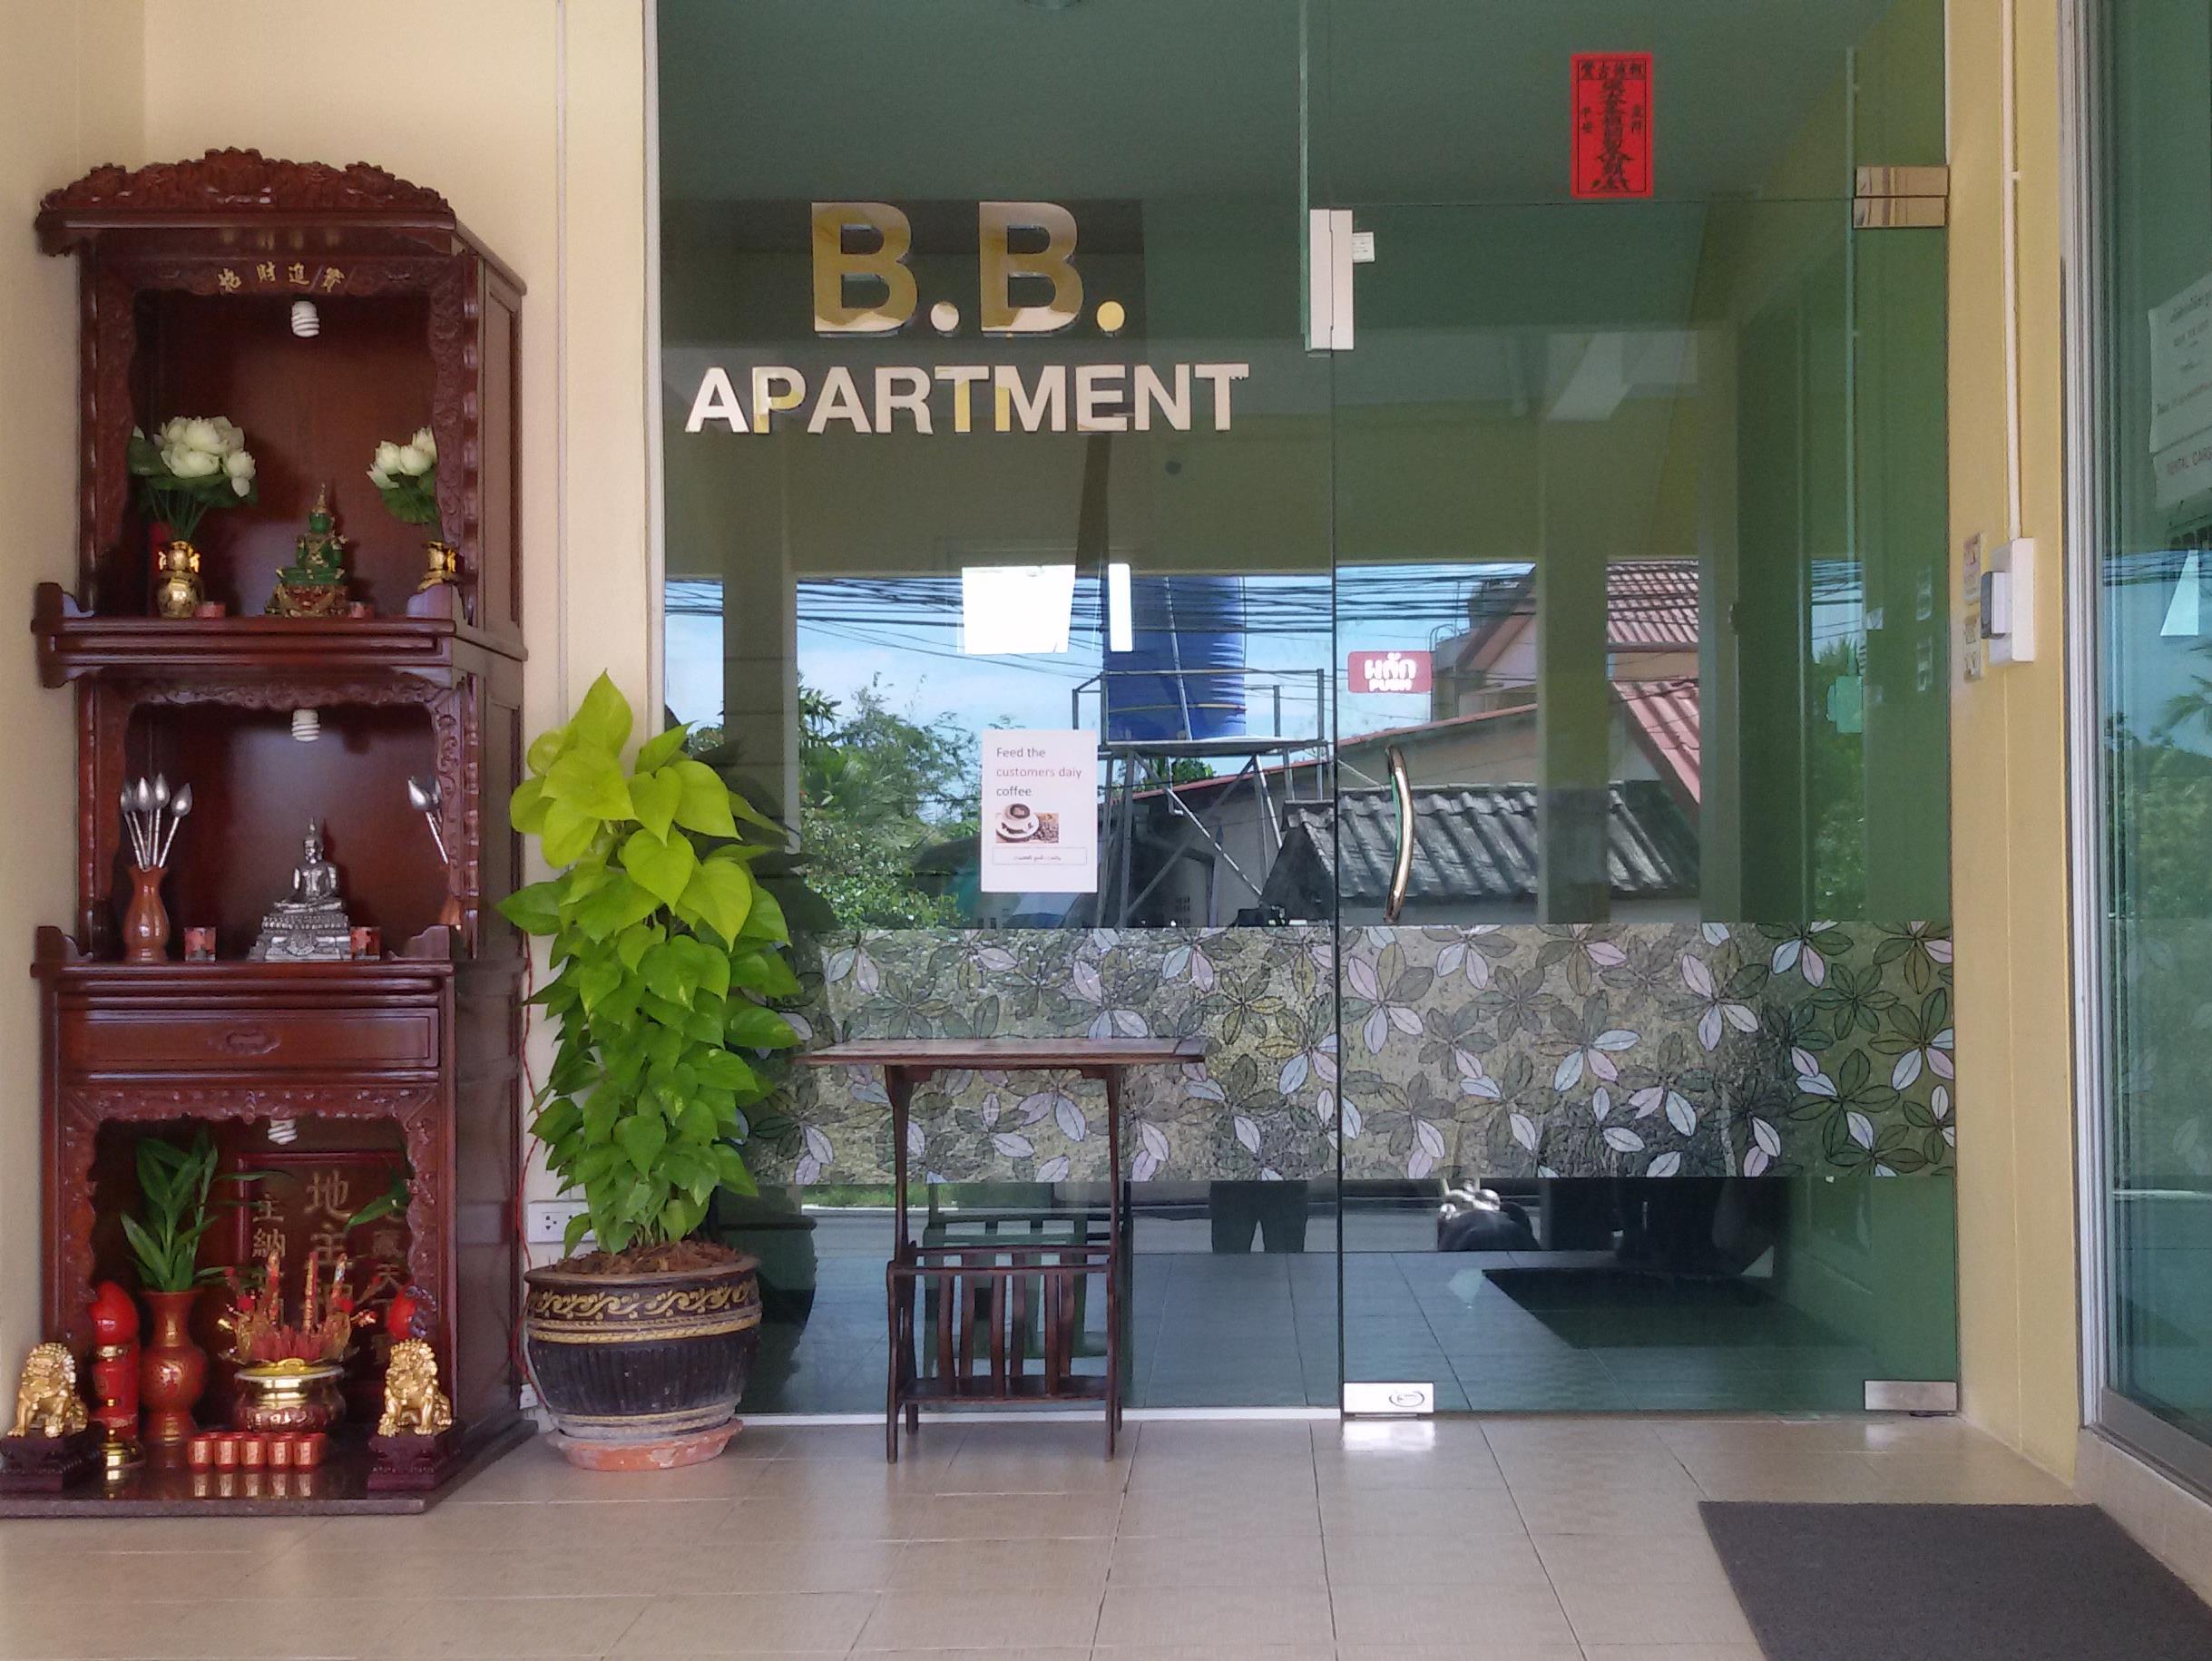 B.B.Apartment Phuket Thailand FAQ 2016, What facilities are there in B.B.Apartment Phuket Thailand 2016, What Languages Spoken are Supported in B.B.Apartment Phuket Thailand 2016, Which payment cards are accepted in B.B.Apartment Phuket Thailand , Thailand B.B.Apartment Phuket room facilities and services Q&A 2016, Thailand B.B.Apartment Phuket online booking services 2016, Thailand B.B.Apartment Phuket address 2016, Thailand B.B.Apartment Phuket telephone number 2016,Thailand B.B.Apartment Phuket map 2016, Thailand B.B.Apartment Phuket traffic guide 2016, how to go Thailand B.B.Apartment Phuket, Thailand B.B.Apartment Phuket booking online 2016, Thailand B.B.Apartment Phuket room types 2016.